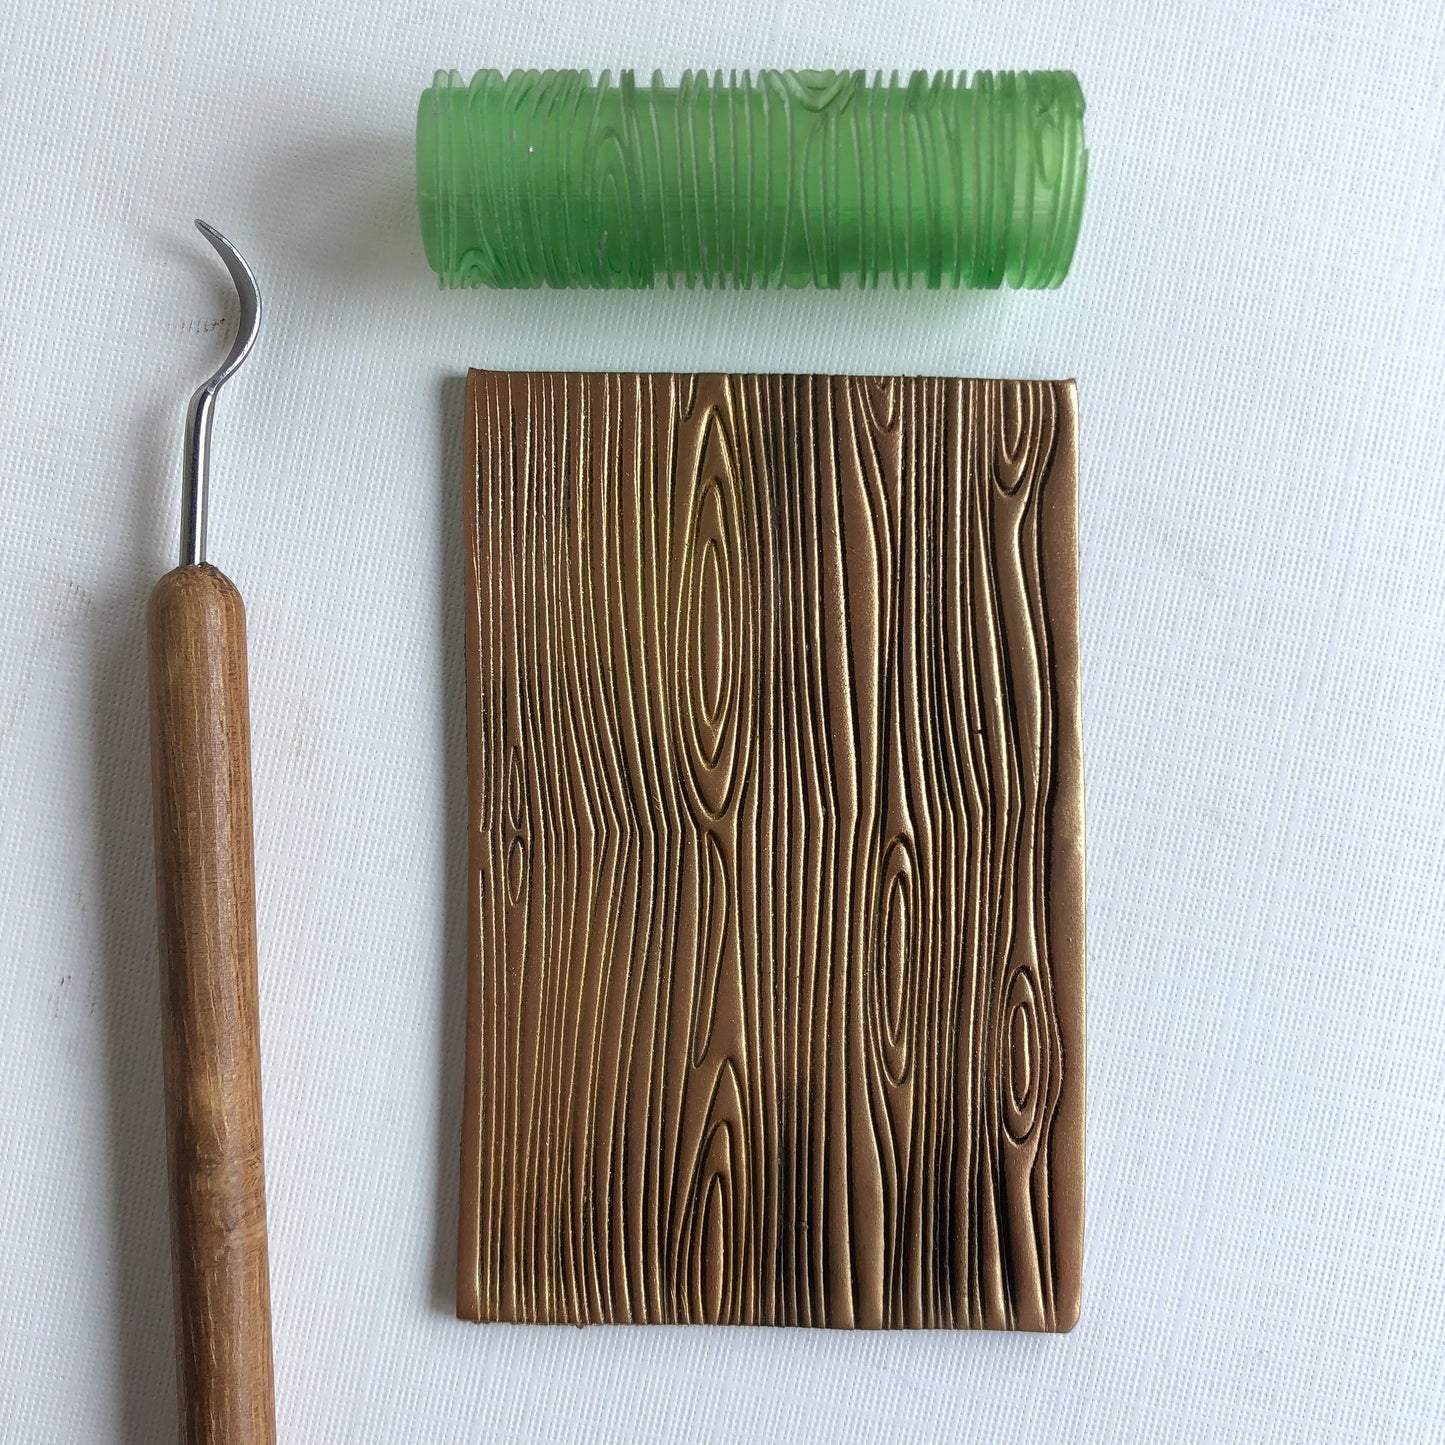 Wood grain roller - made for use with polymer clay